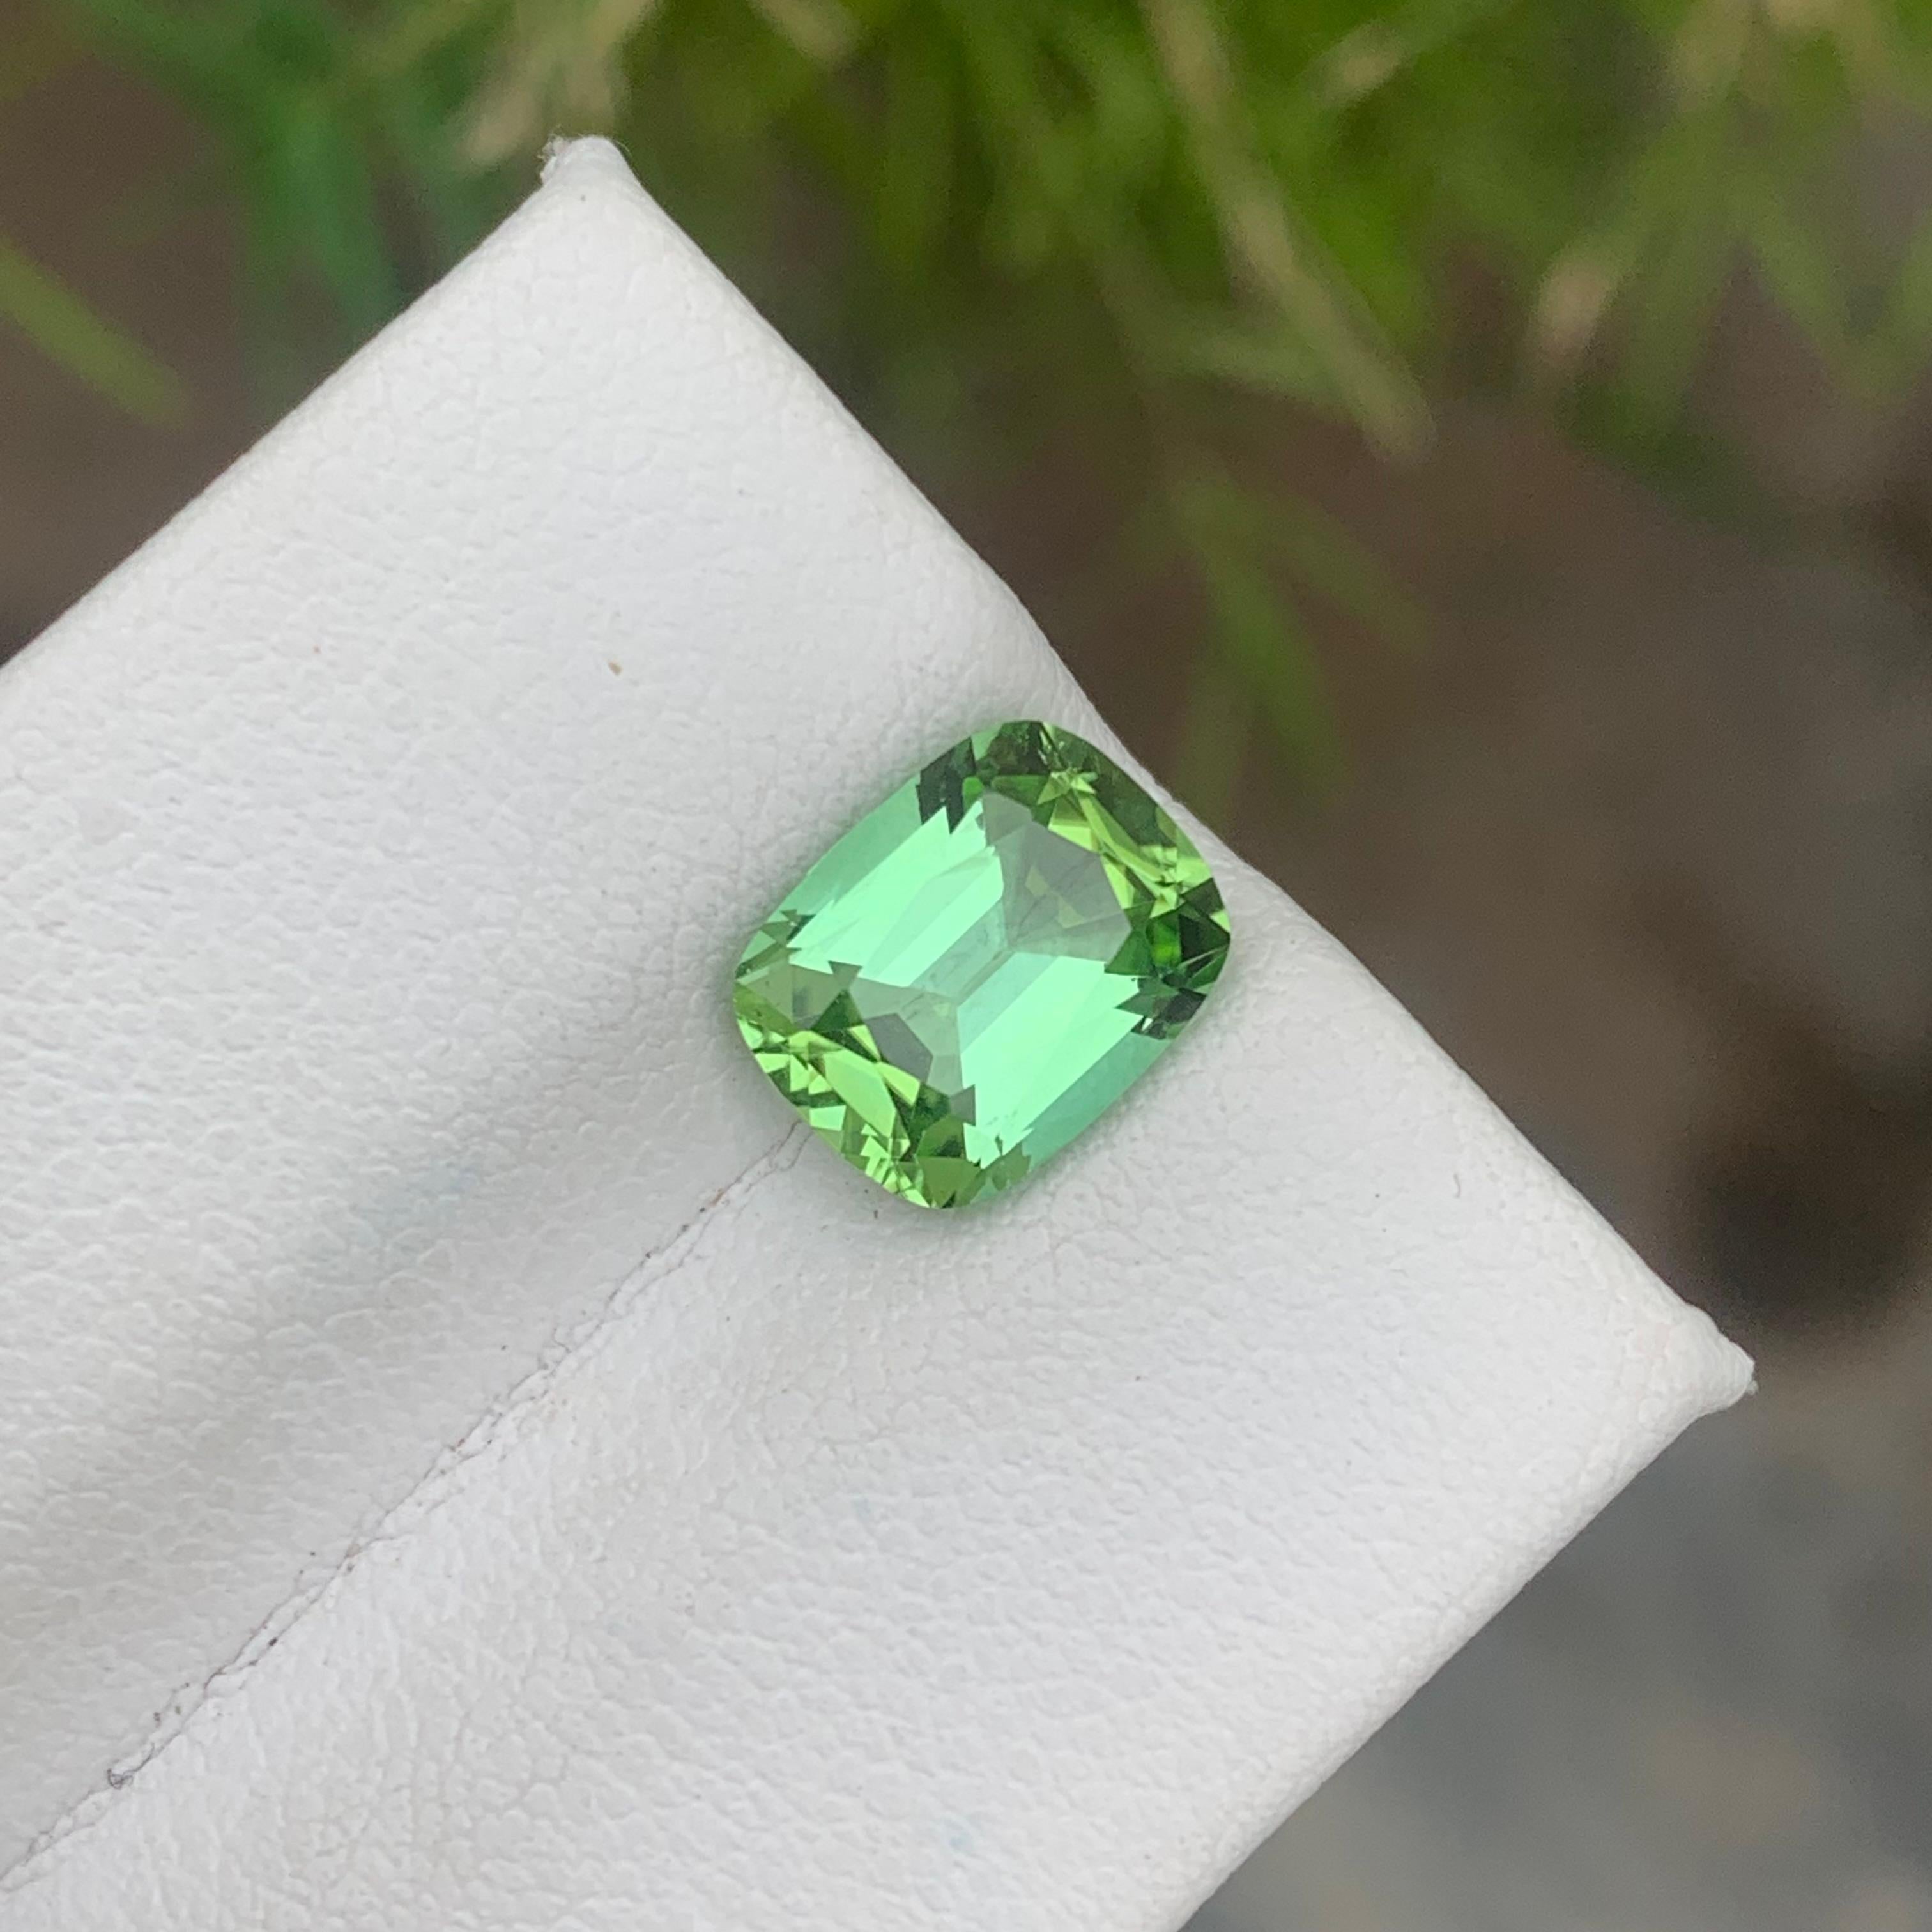 Stunning 2.65 Carat Natural Loose Tourmaline Ring Cushion Cut From Afghanistan For Sale 9